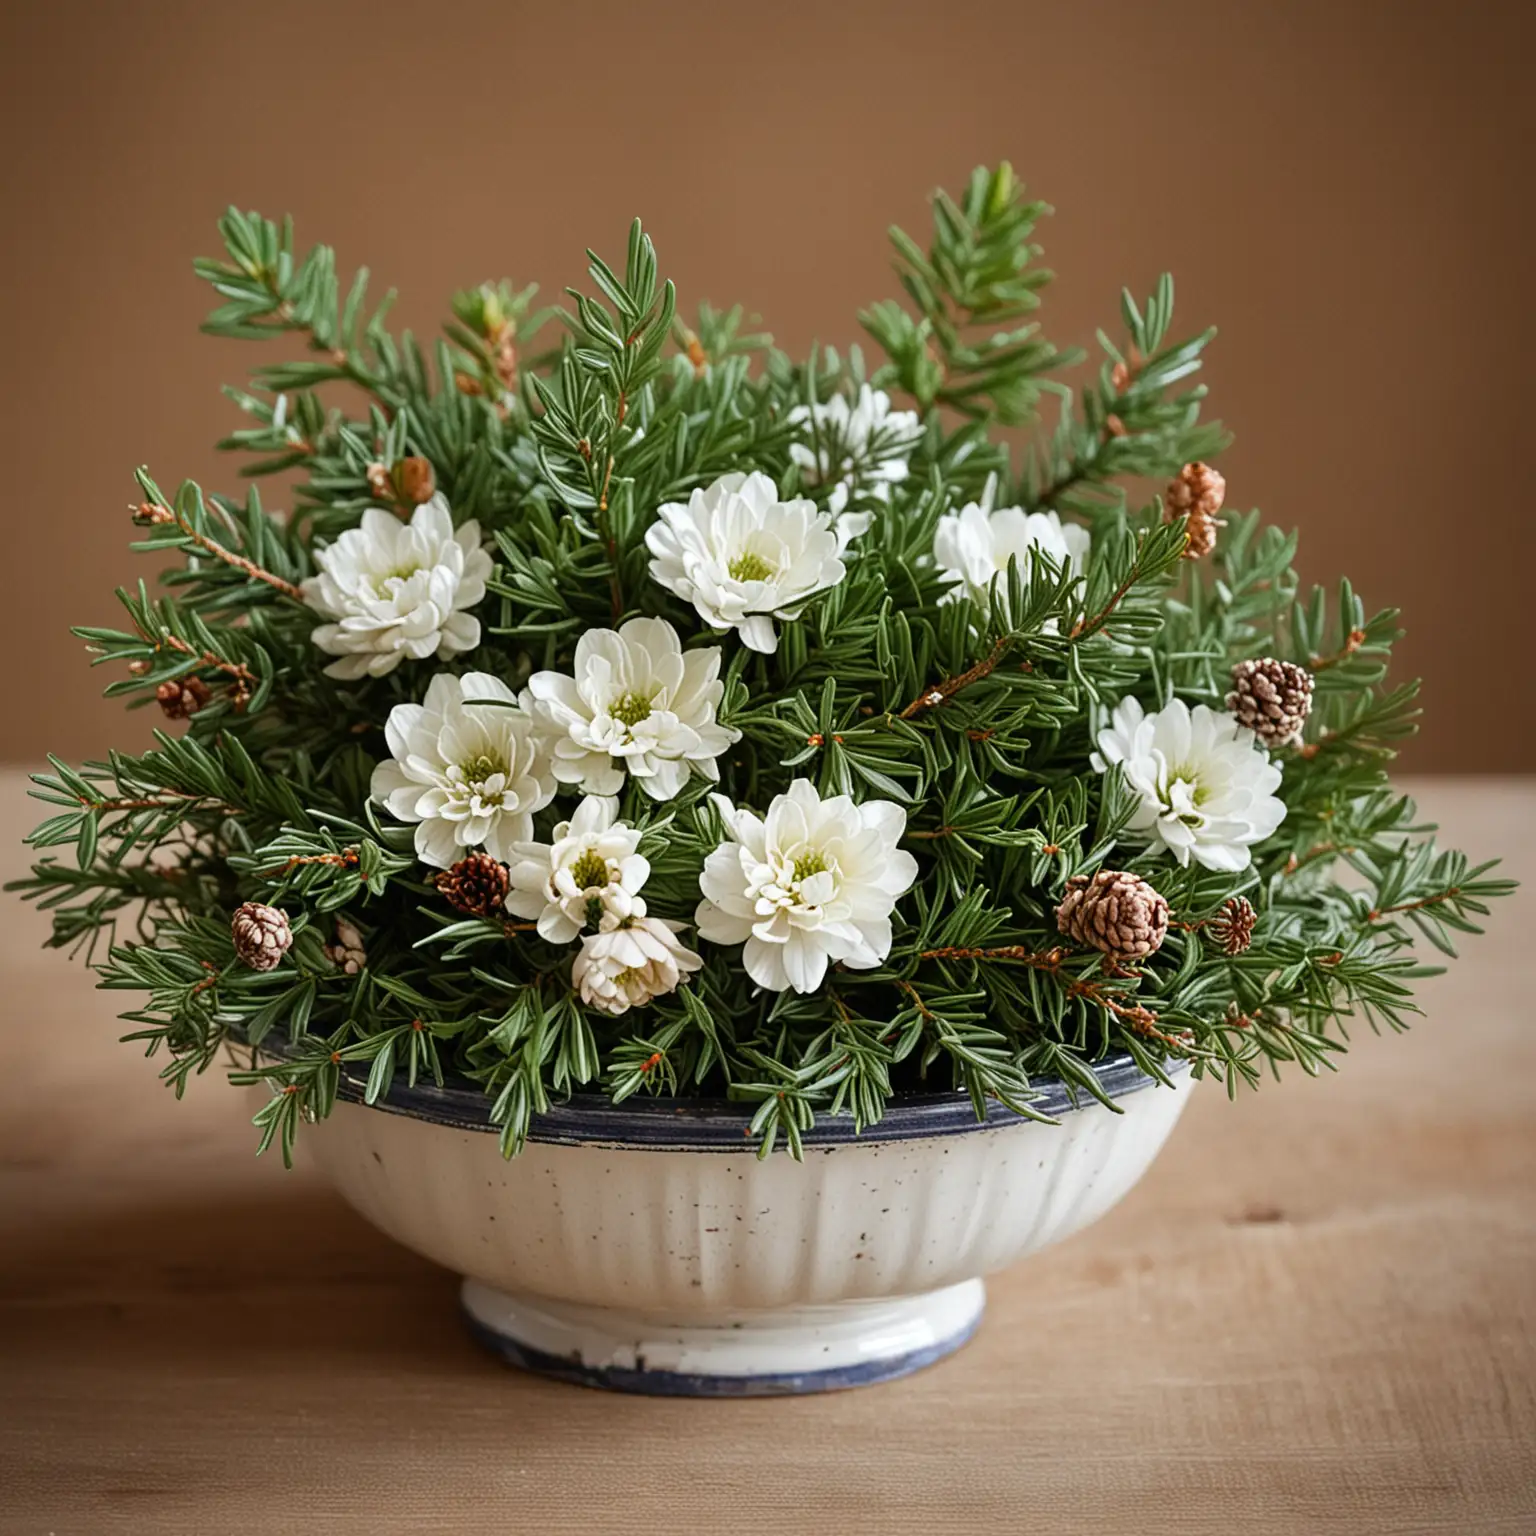 small centerpiece with vintage bowl filled with evergreen and winter flowers for a winter wedding centerpiece